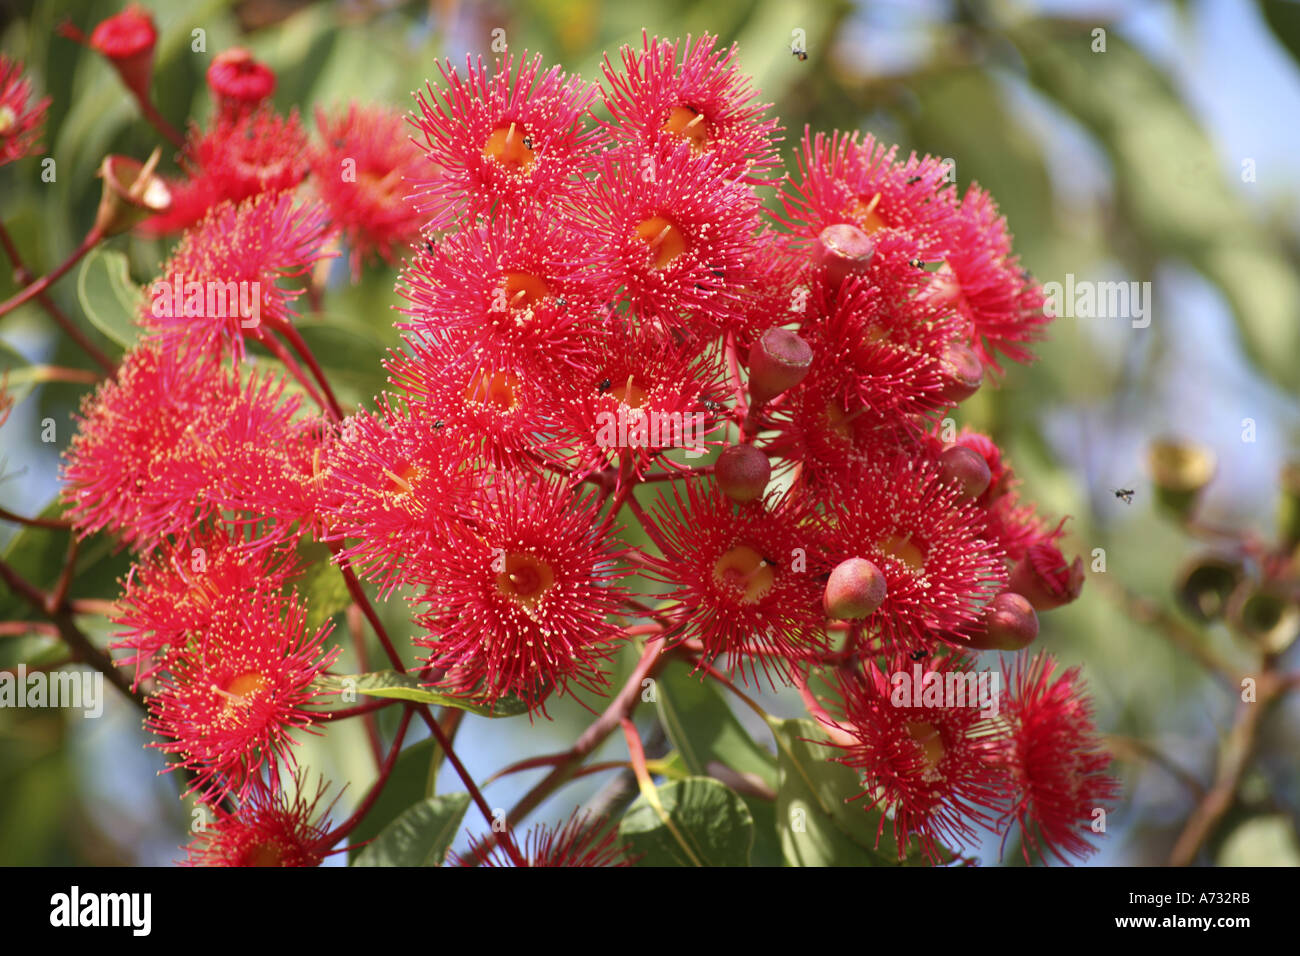 Red Gum or eucalypt blossoms Stock Photo